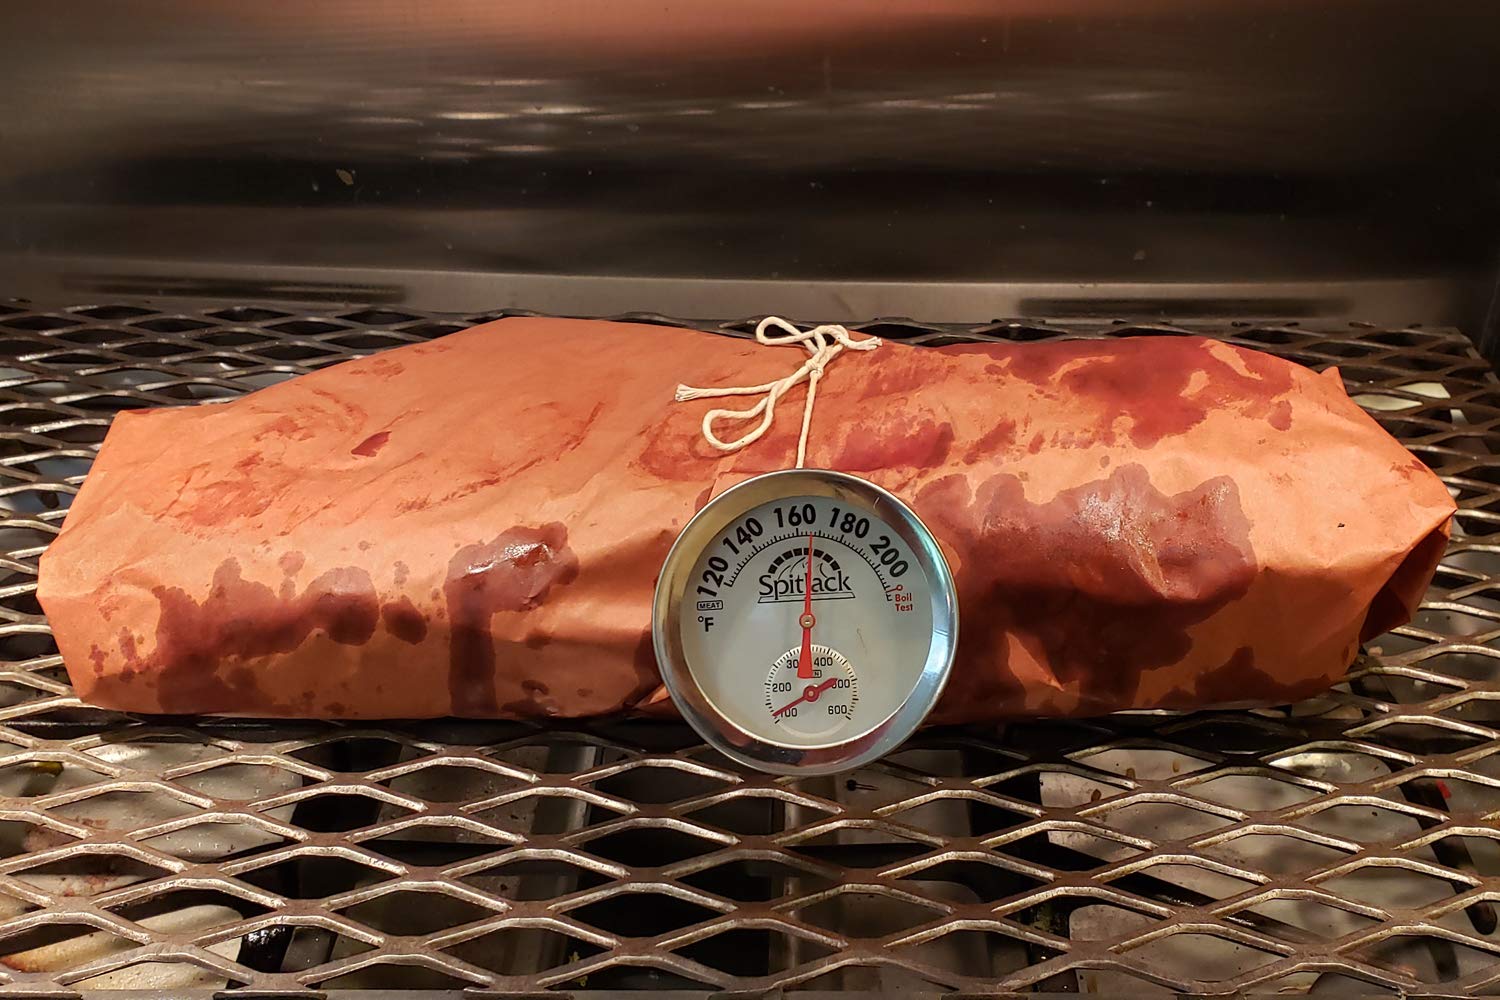 Meat and oven thermometer